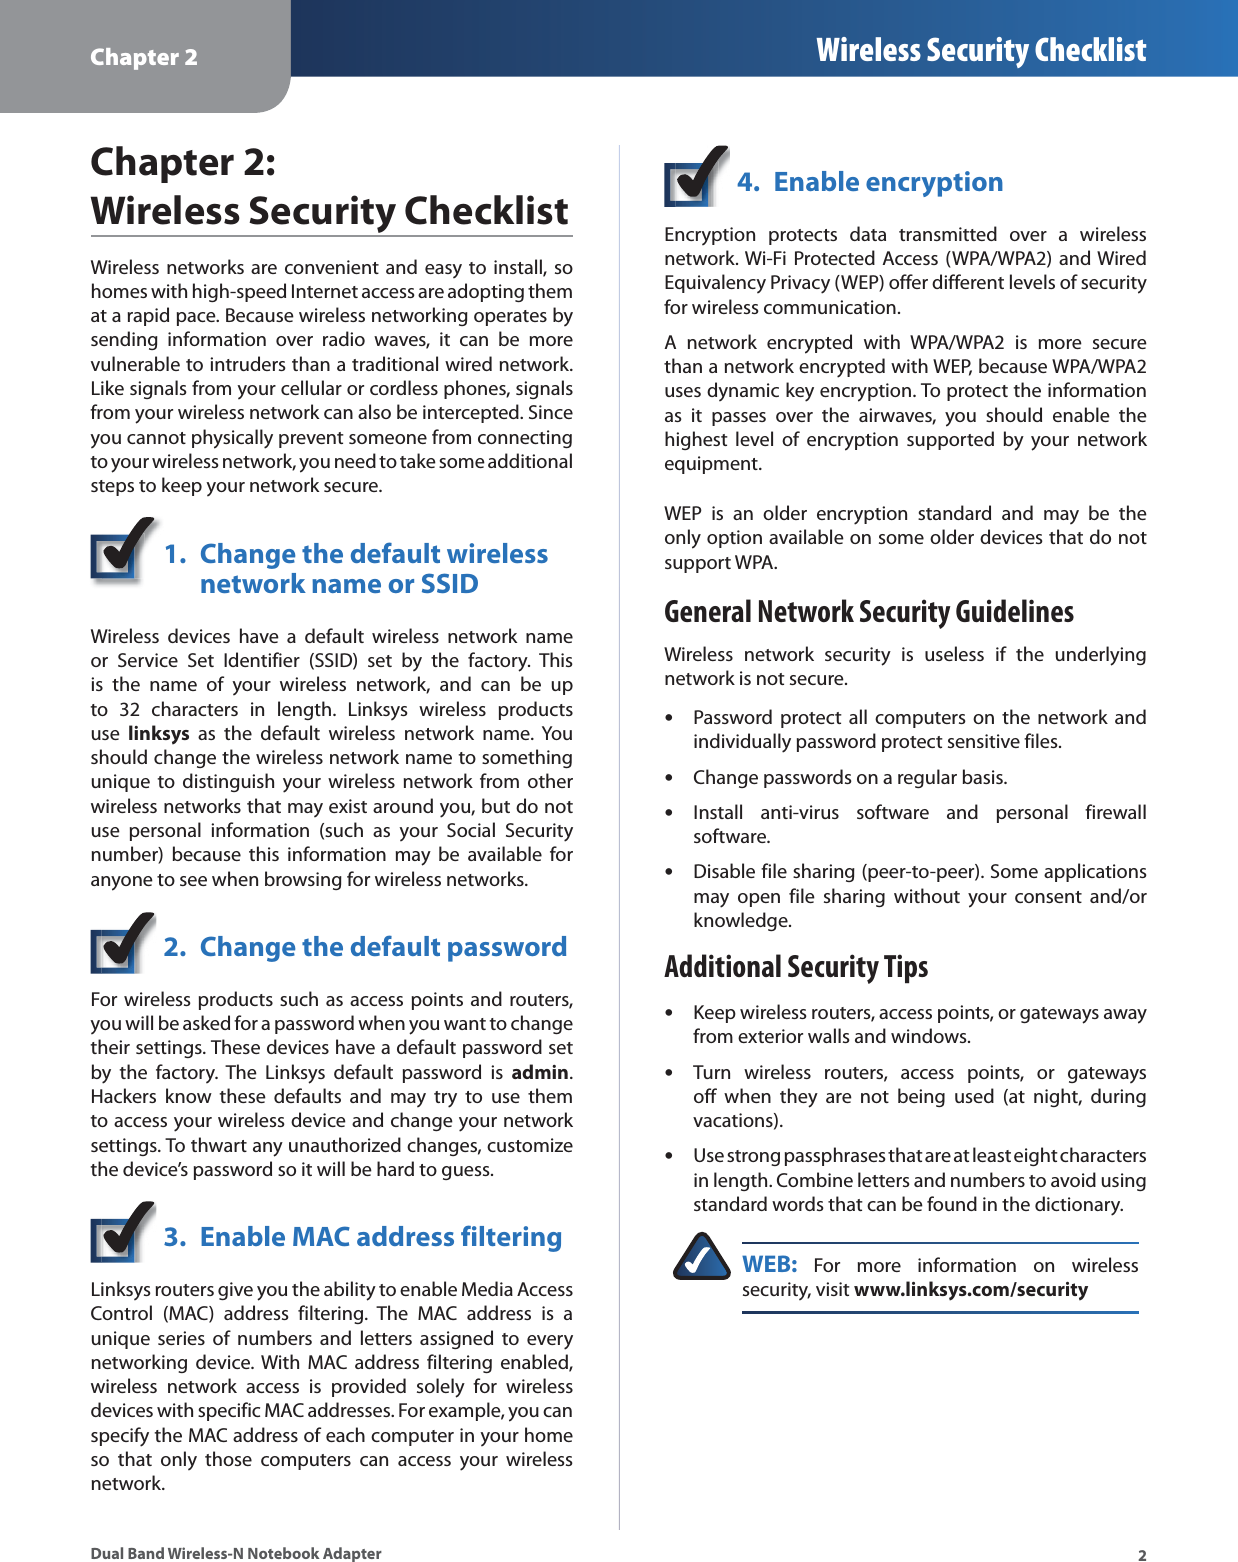 Chapter 2 Wireless Security Checklist2Dual Band Wireless-N Notebook AdapterChapter 2:Wireless Security ChecklistWireless networks are convenient and easy to install, so homes with high-speed Internet access are adopting them at a rapid pace. Because wireless networking operates by sending information over radio waves, it can be more vulnerable to intruders than a traditional wired network. Like signals from your cellular or cordless phones, signals from your wireless network can also be intercepted. Since you cannot physically prevent someone from connecting to your wireless network, you need to take some additional steps to keep your network secure. 1. Change the default wireless network name or SSIDWireless devices have a default wireless network name or Service Set Identifier (SSID) set by the factory. This is the name of your wireless network, and can be up to 32 characters in length. Linksys wireless products use linksys as the default wireless network name. You should change the wireless network name to something unique to distinguish your wireless network from other wireless networks that may exist around you, but do not use personal information (such as your Social Security number) because this information may be available for anyone to see when browsing for wireless networks. 2. Change the default passwordFor wireless products such as access points and routers, you will be asked for a password when you want to change their settings. These devices have a default password set by the factory. The Linksys default password is admin.Hackers know these defaults and may try to use them to access your wireless device and change your network settings. To thwart any unauthorized changes, customize the device’s password so it will be hard to guess.3. Enable MAC address filteringLinksys routers give you the ability to enable Media Access Control (MAC) address filtering. The MAC address is a unique series of numbers and letters assigned to every networking device. With MAC address filtering enabled, wireless network access is provided solely for wireless devices with specific MAC addresses. For example, you can specify the MAC address of each computer in your home so that only those computers can access your wireless network. 4. Enable encryptionEncryption protects data transmitted over a wireless network. Wi-Fi Protected Access (WPA/WPA2) and Wired Equivalency Privacy (WEP) offer different levels of security for wireless communication.A network encrypted with WPA/WPA2 is more secure than a network encrypted with WEP, because WPA/WPA2 uses dynamic key encryption. To protect the information as it passes over the airwaves, you should enable the highest level of encryption supported by your network equipment. WEP is an older encryption standard and may be the only option available on some older devices that do not support WPA.General Network Security GuidelinesWireless network security is useless if the underlying network is not secure. Password protect all computers on the network and individually password protect sensitive files.Change passwords on a regular basis.Install anti-virus software and personal firewall software.Disable file sharing (peer-to-peer). Some applications may open file sharing without your consent and/or knowledge.Additional Security TipsKeep wireless routers, access points, or gateways away from exterior walls and windows.Turn wireless routers, access points, or gateways off when they are not being used (at night, during vacations).Use strong passphrases that are at least eight characters in length. Combine letters and numbers to avoid using standard words that can be found in the dictionary. WEB: For more information on wireless security, visit www.linksys.com/security•••••••